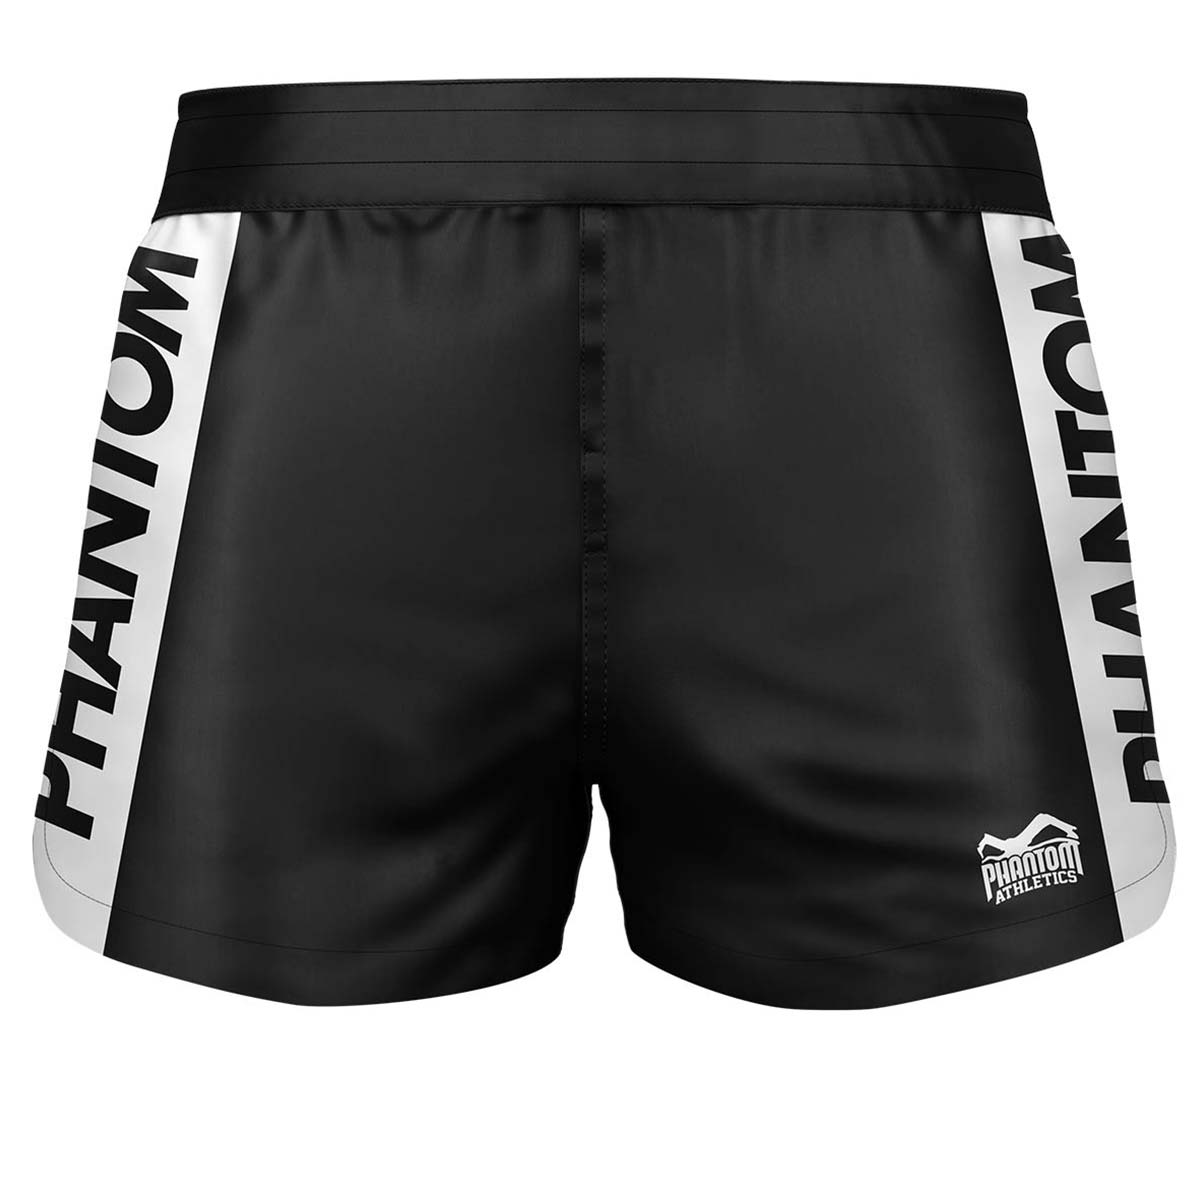 Fightshorts fusion tipp – must